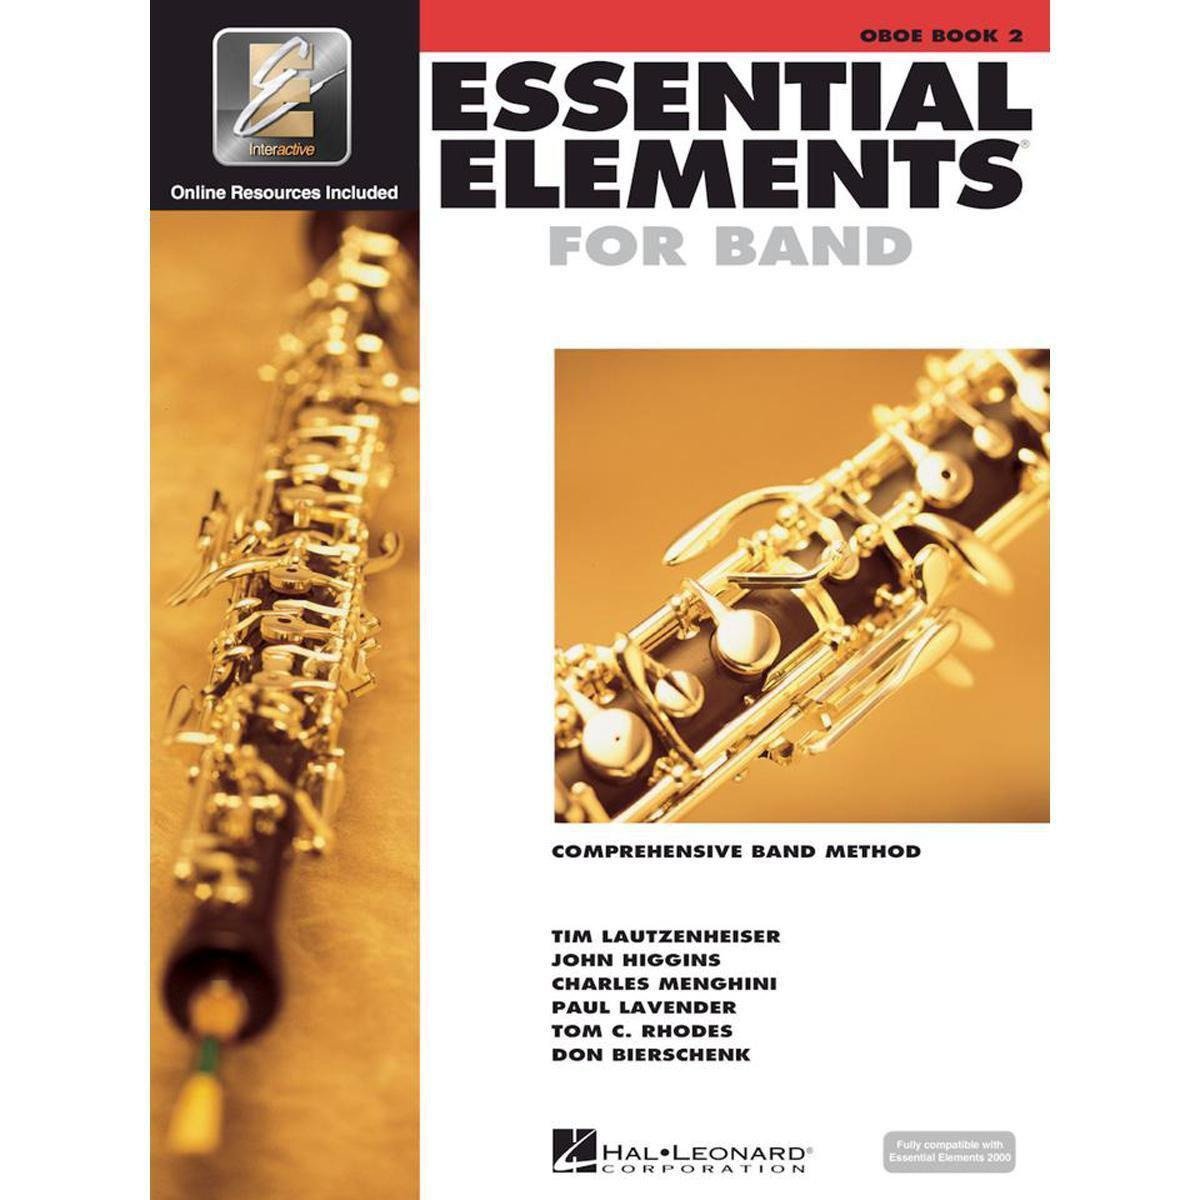 Essential Elements for Band Book 2-Oboe-Andy's Music